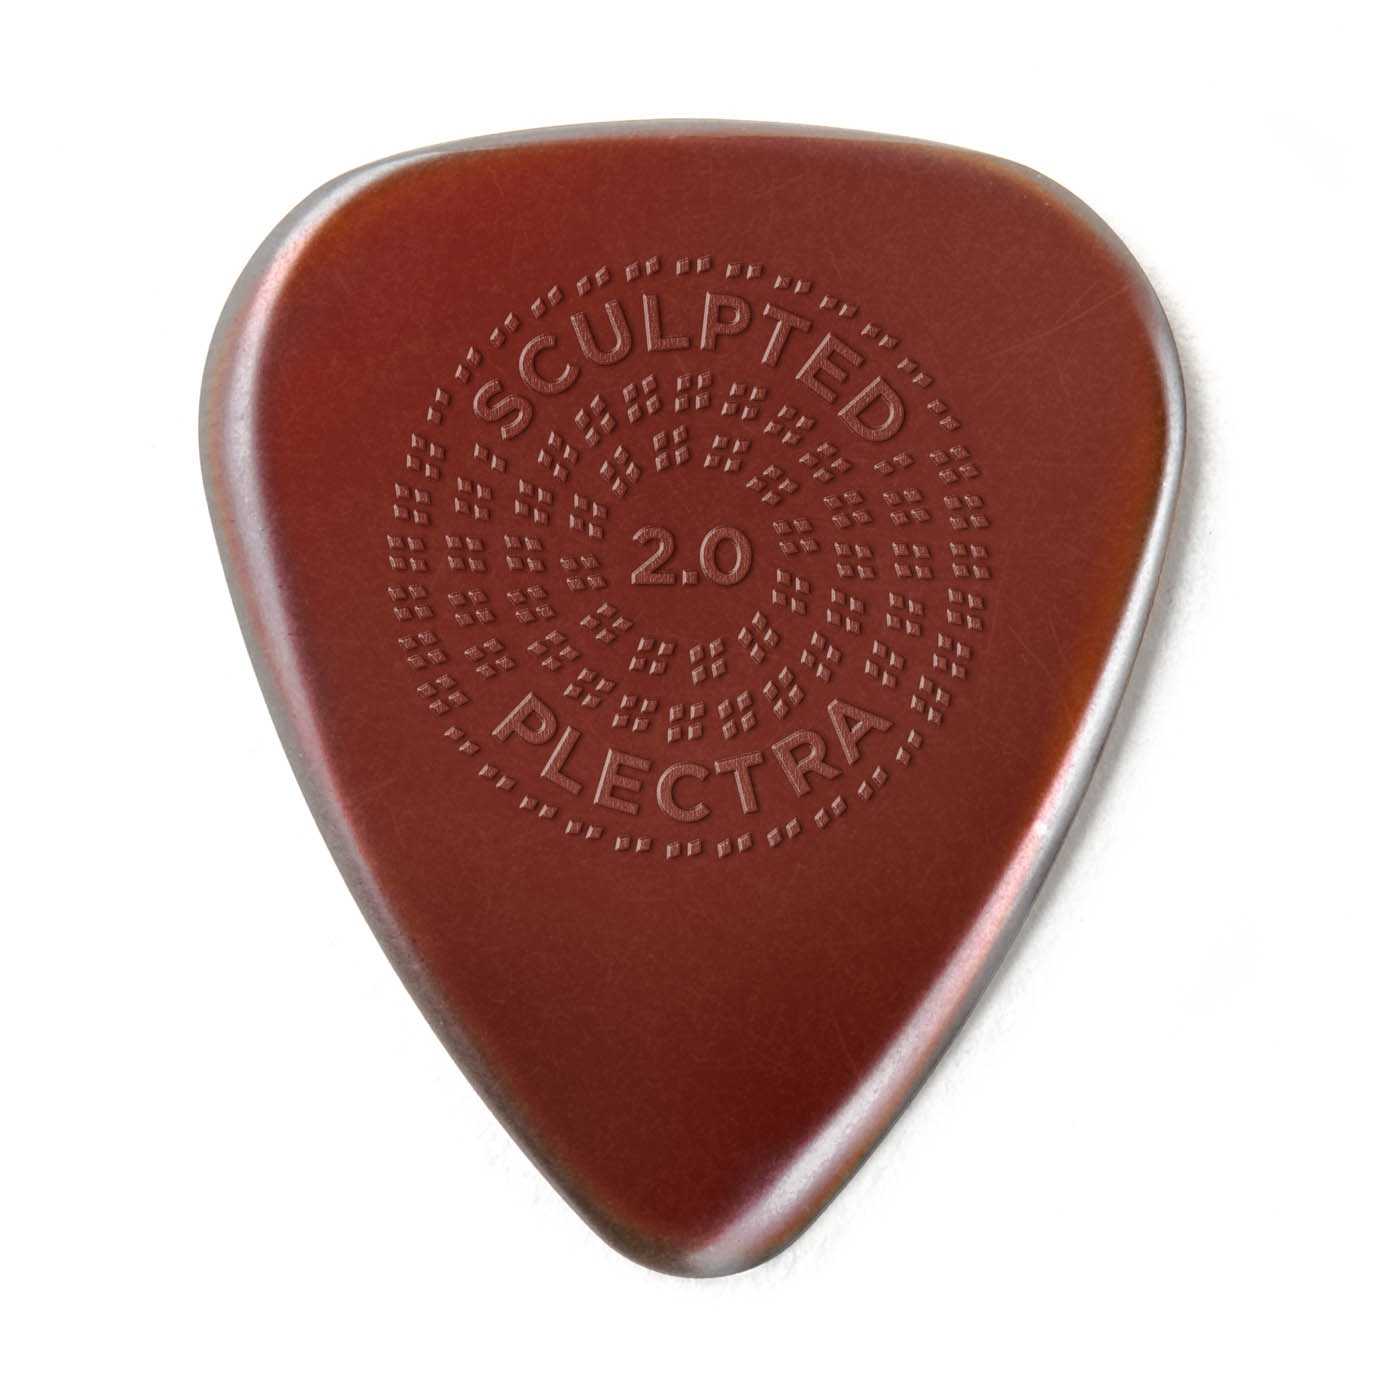 Image 2 of Dunlop Primetone Sculpted Plectra, Ultex Standard with Grip, 2.00MM Thick, Three Pack - SKU# PK510-200 : Product Type Accessories & Parts : Elderly Instruments